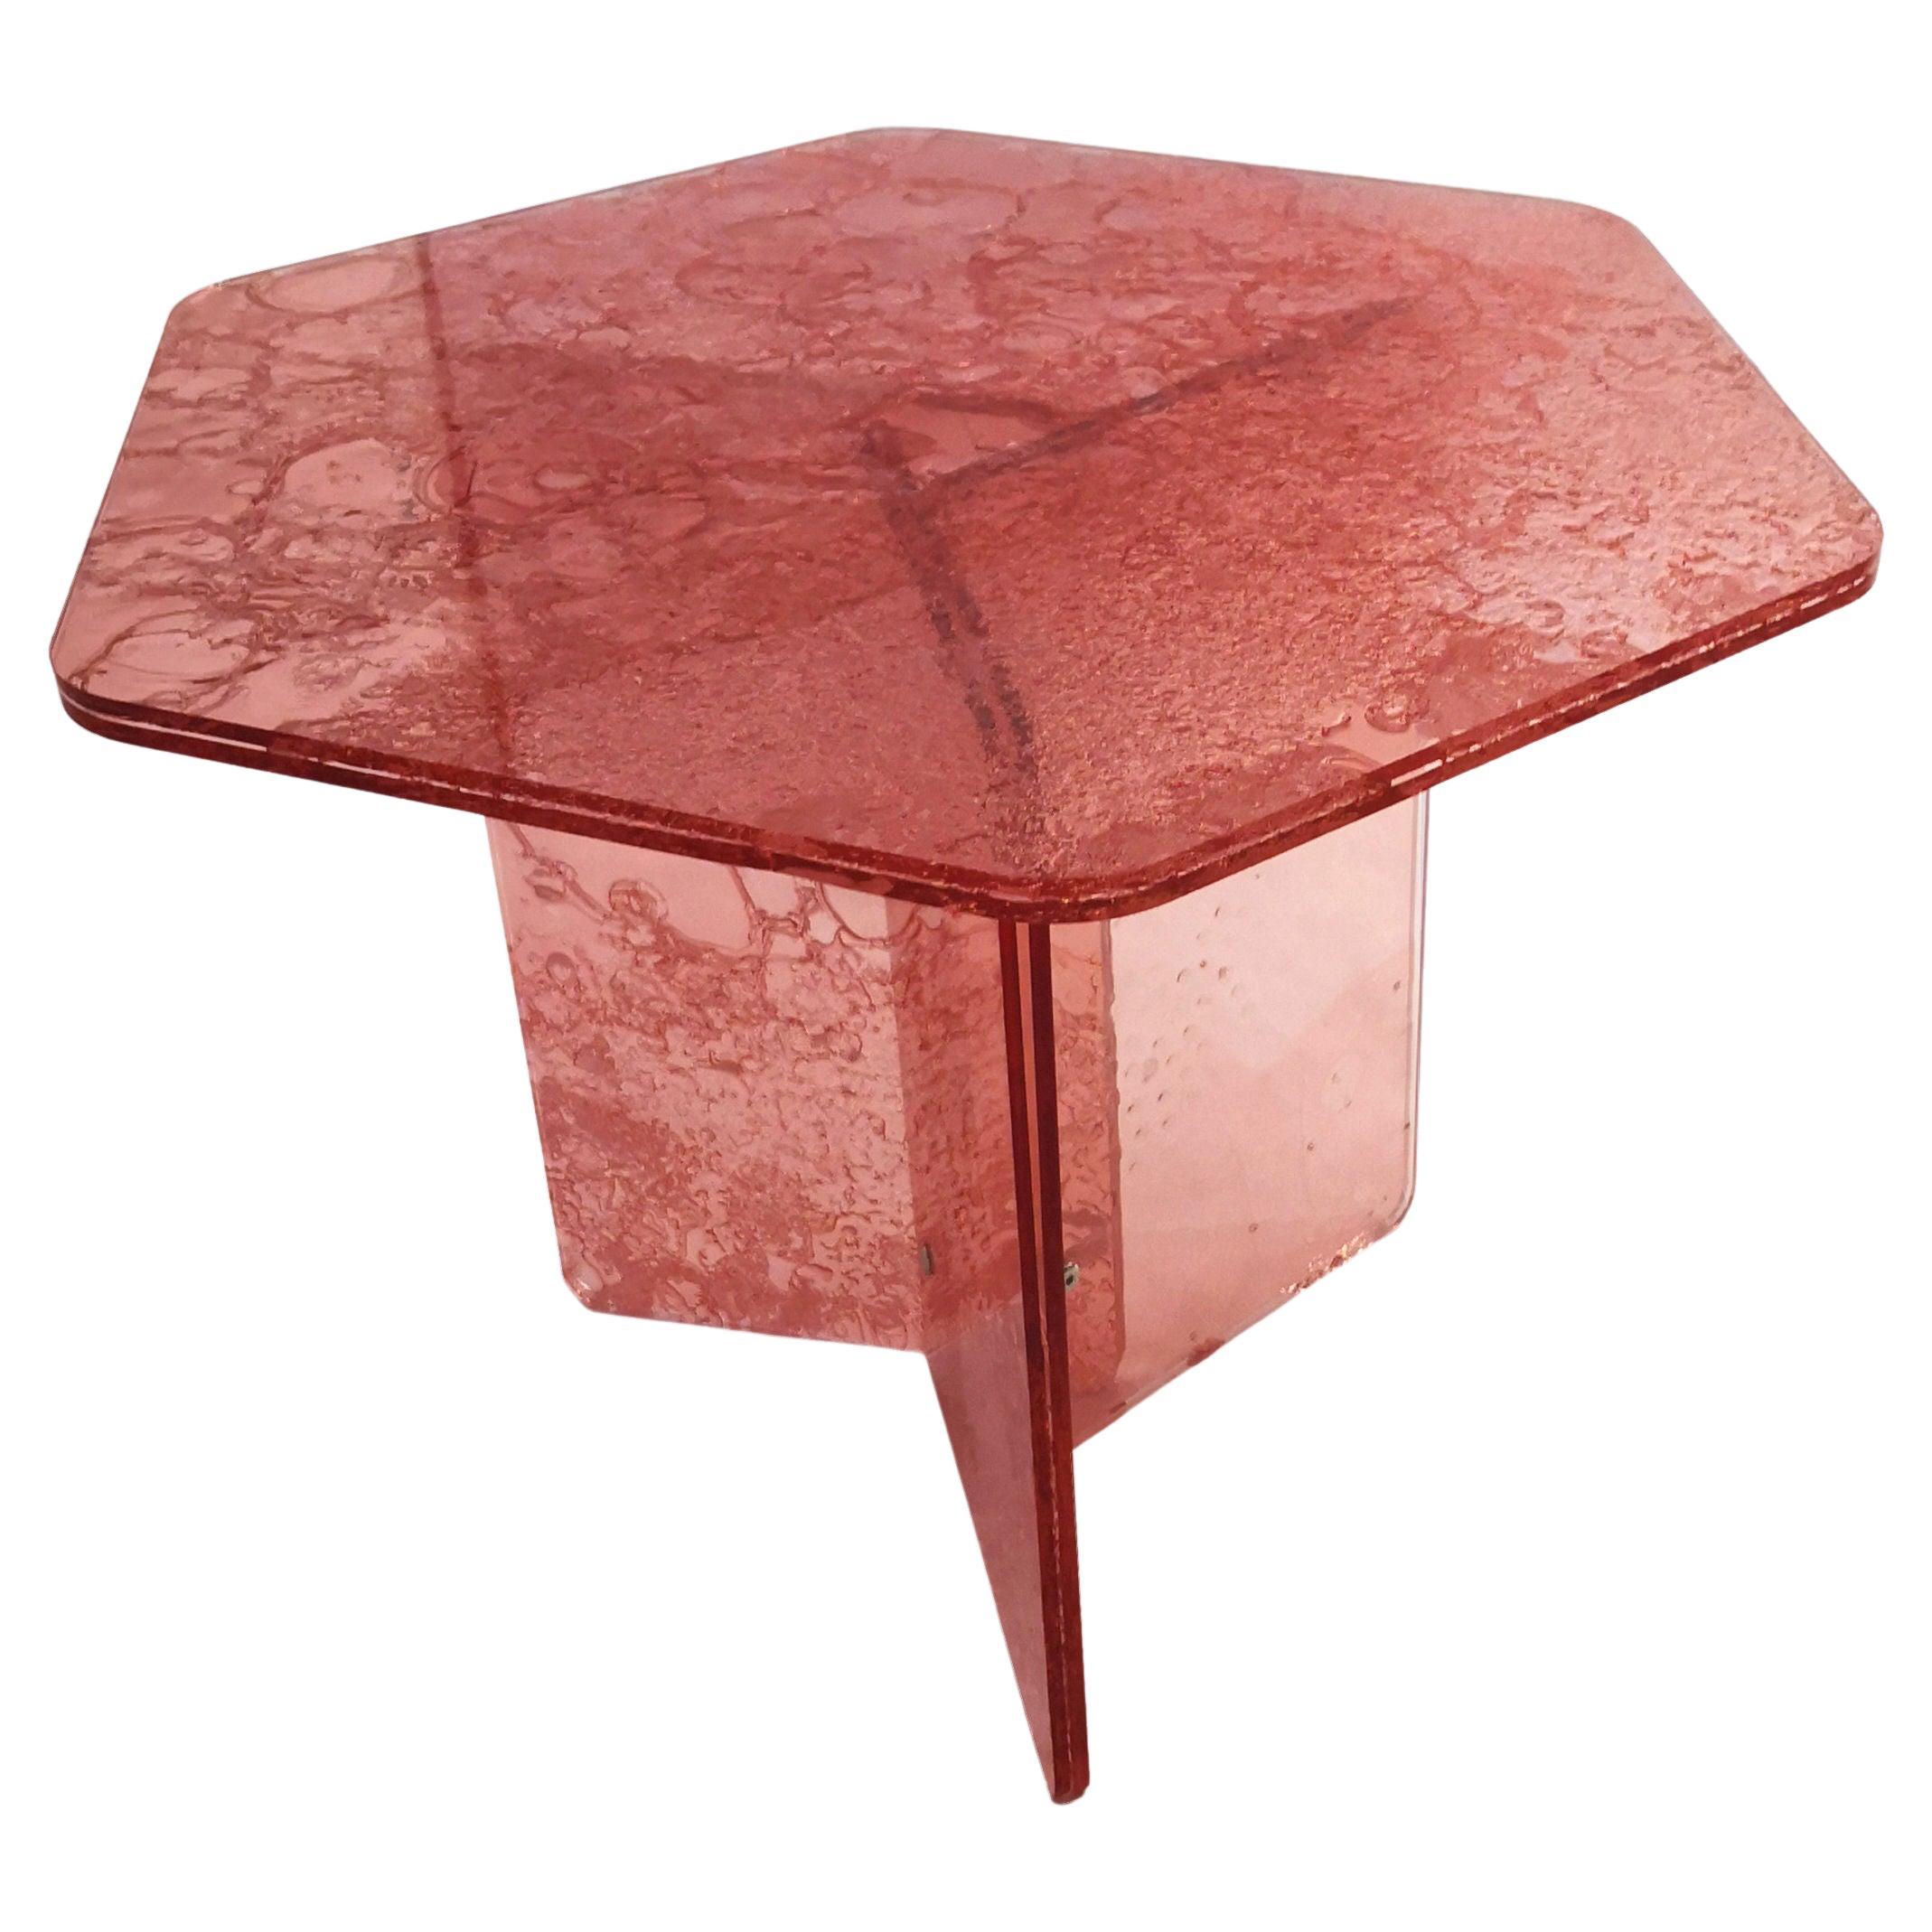 Sketch Hexagon Sidetable Made of Pink Acrylic Des, Roberto Giacomucci in 2020 For Sale